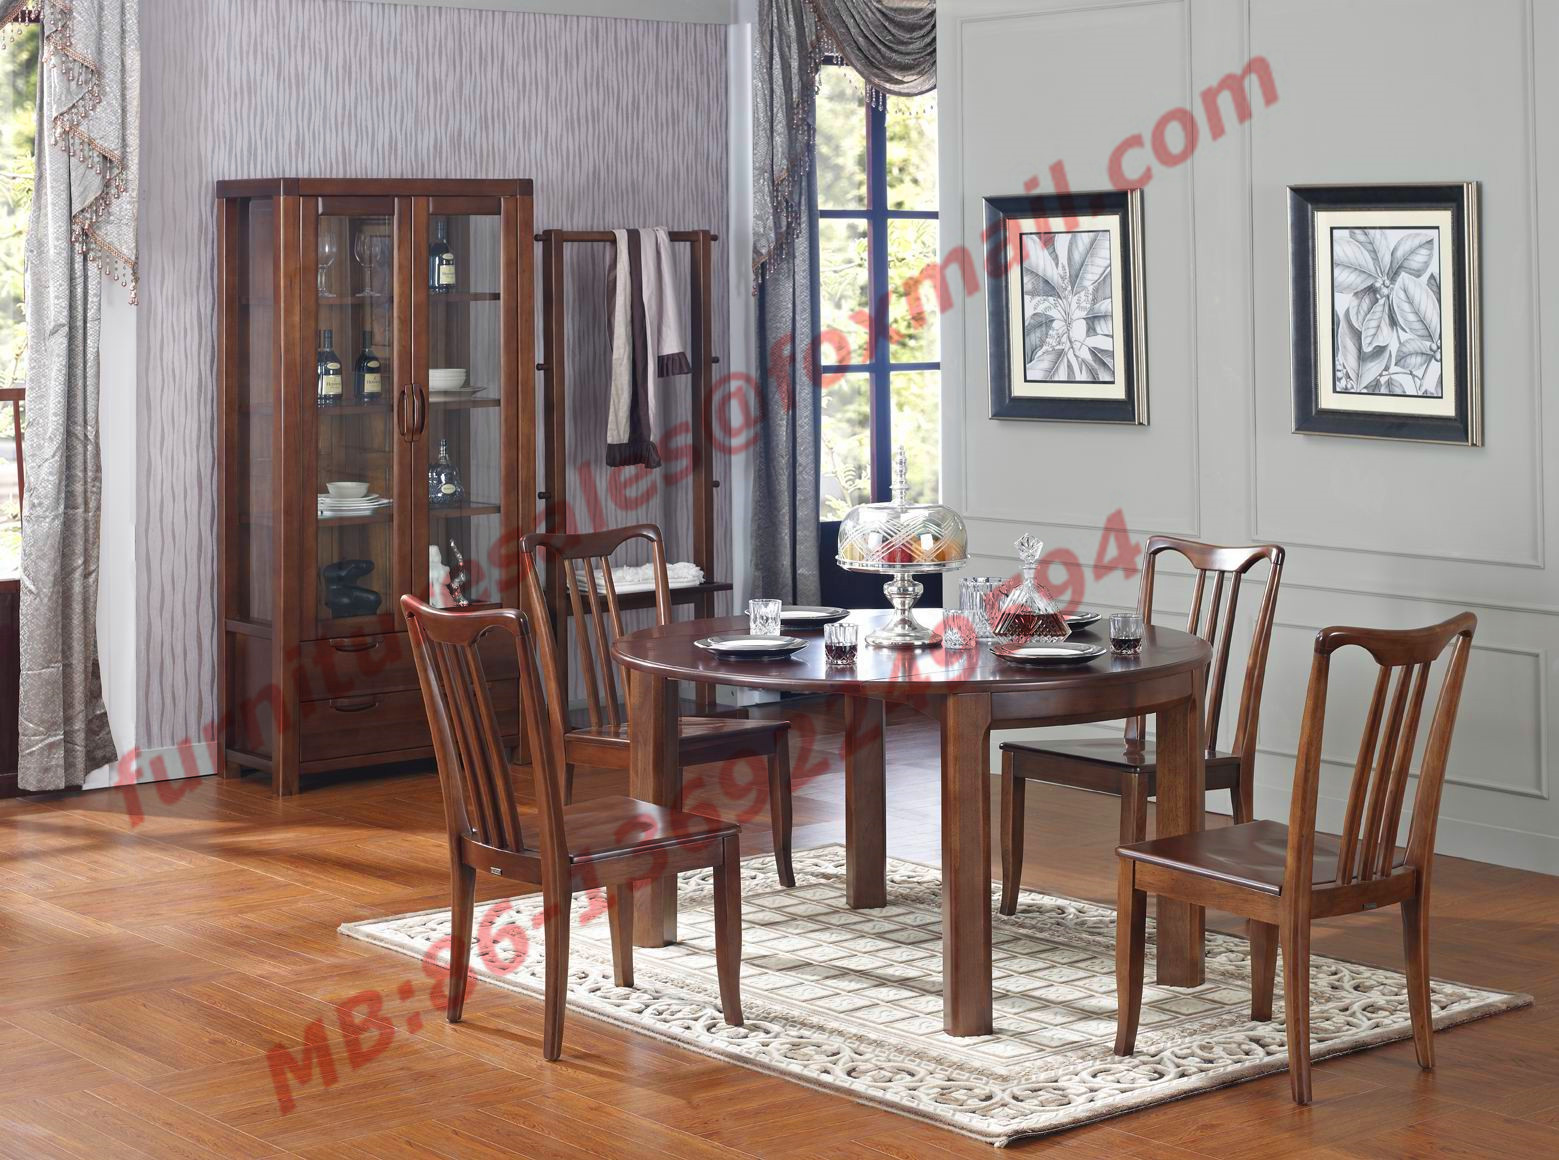  Can Folding and Opening Dining table in Solid Wooden Dining Room Set Manufactures